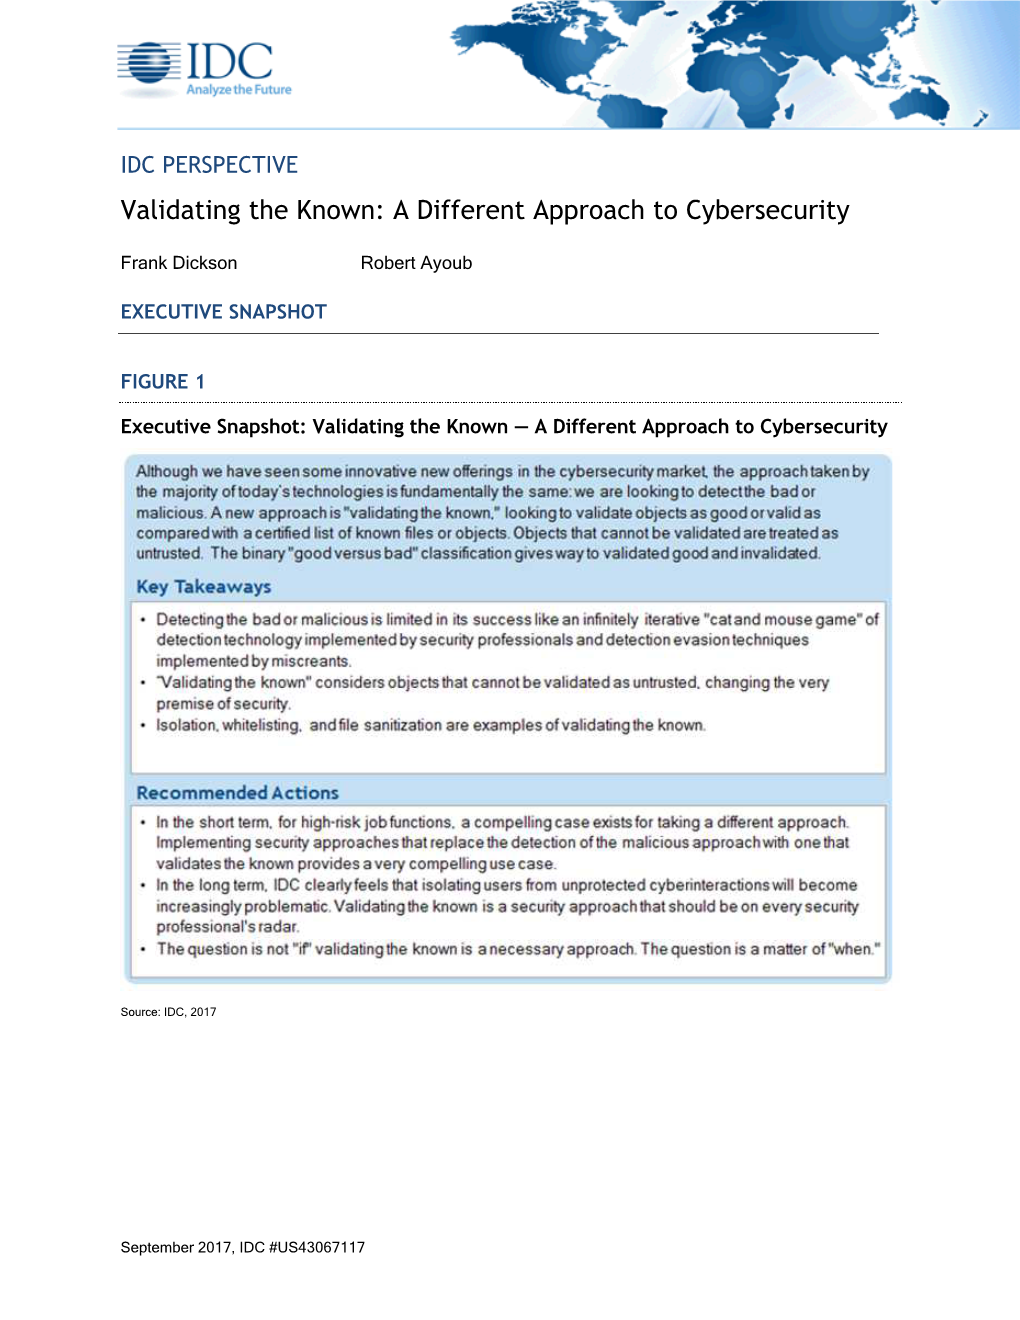 Validating the Known: a Different Approach to Cybersecurity